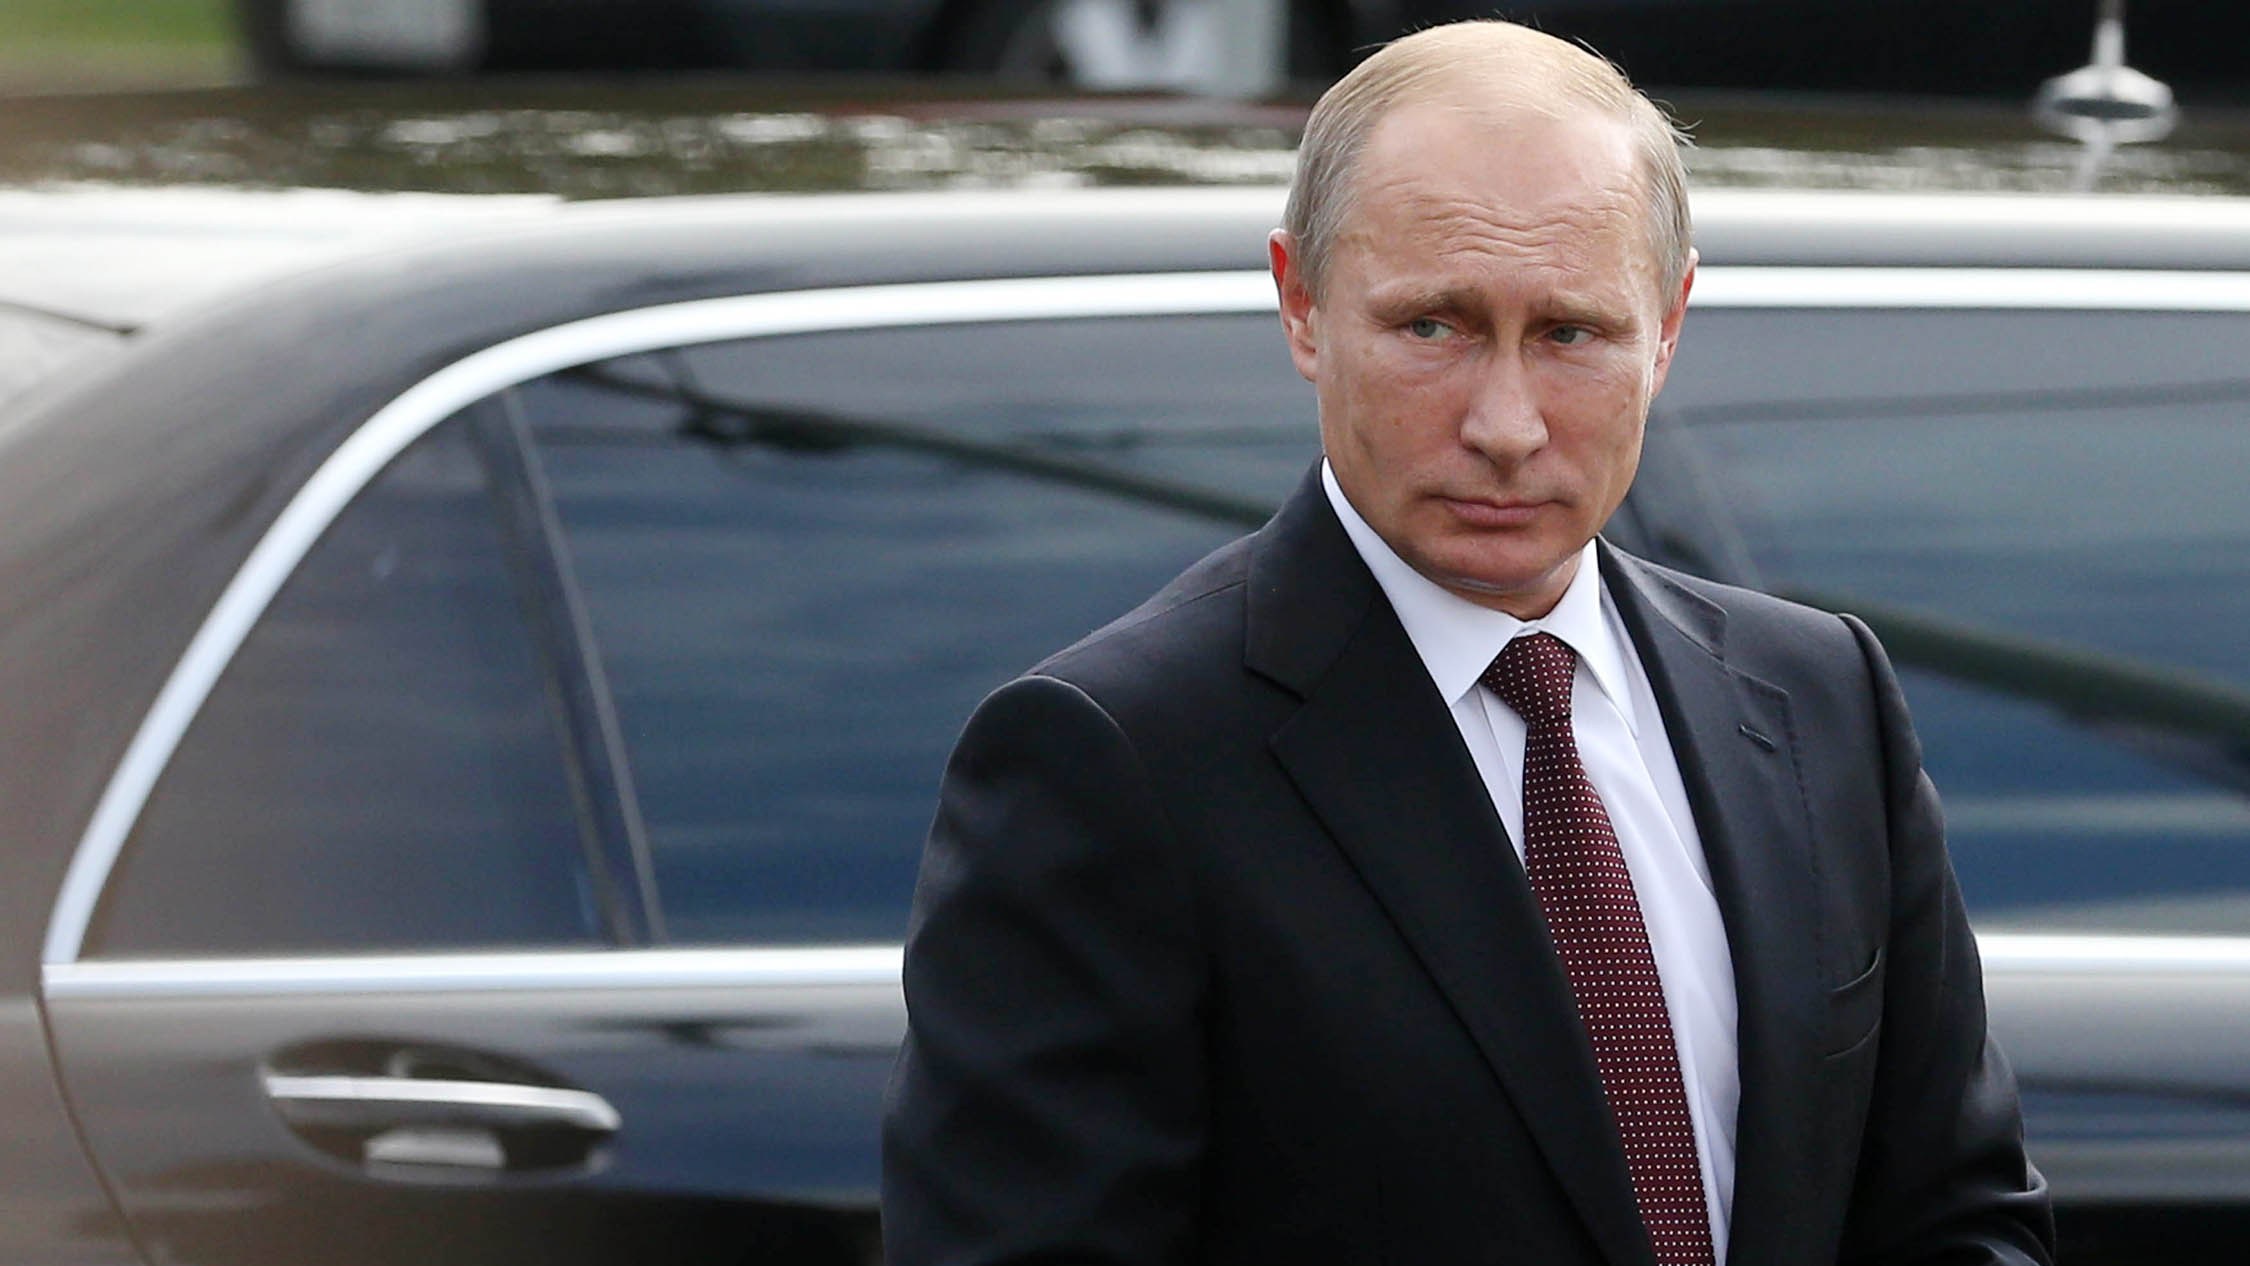 America’s ruling class makes it easy for Putin to meddle